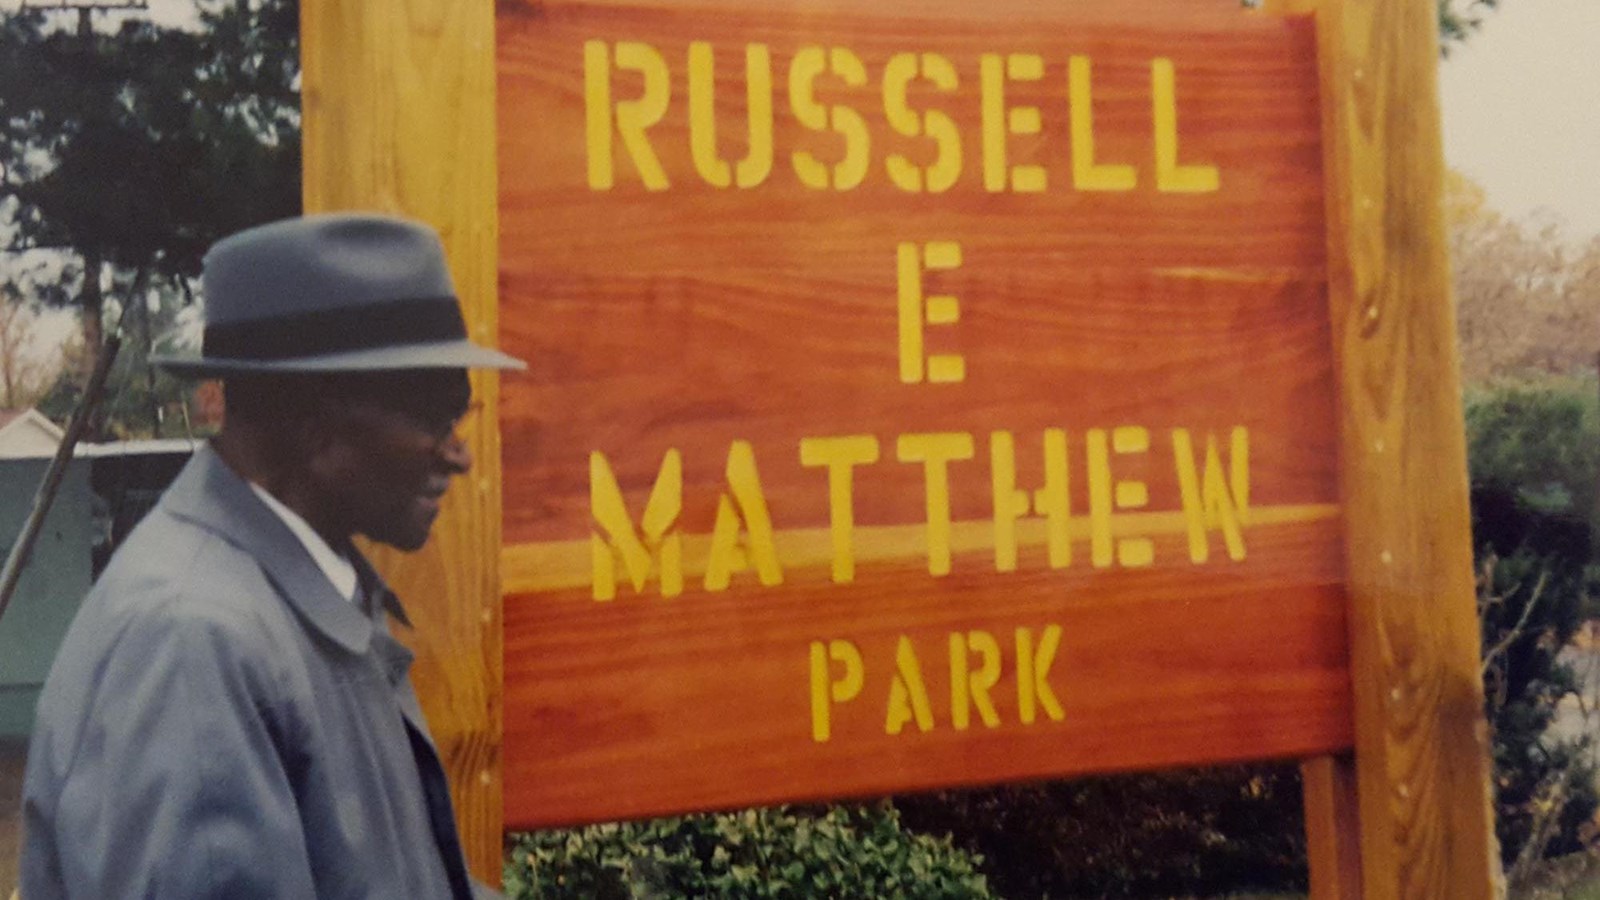 man with hat standing in front of park sign 